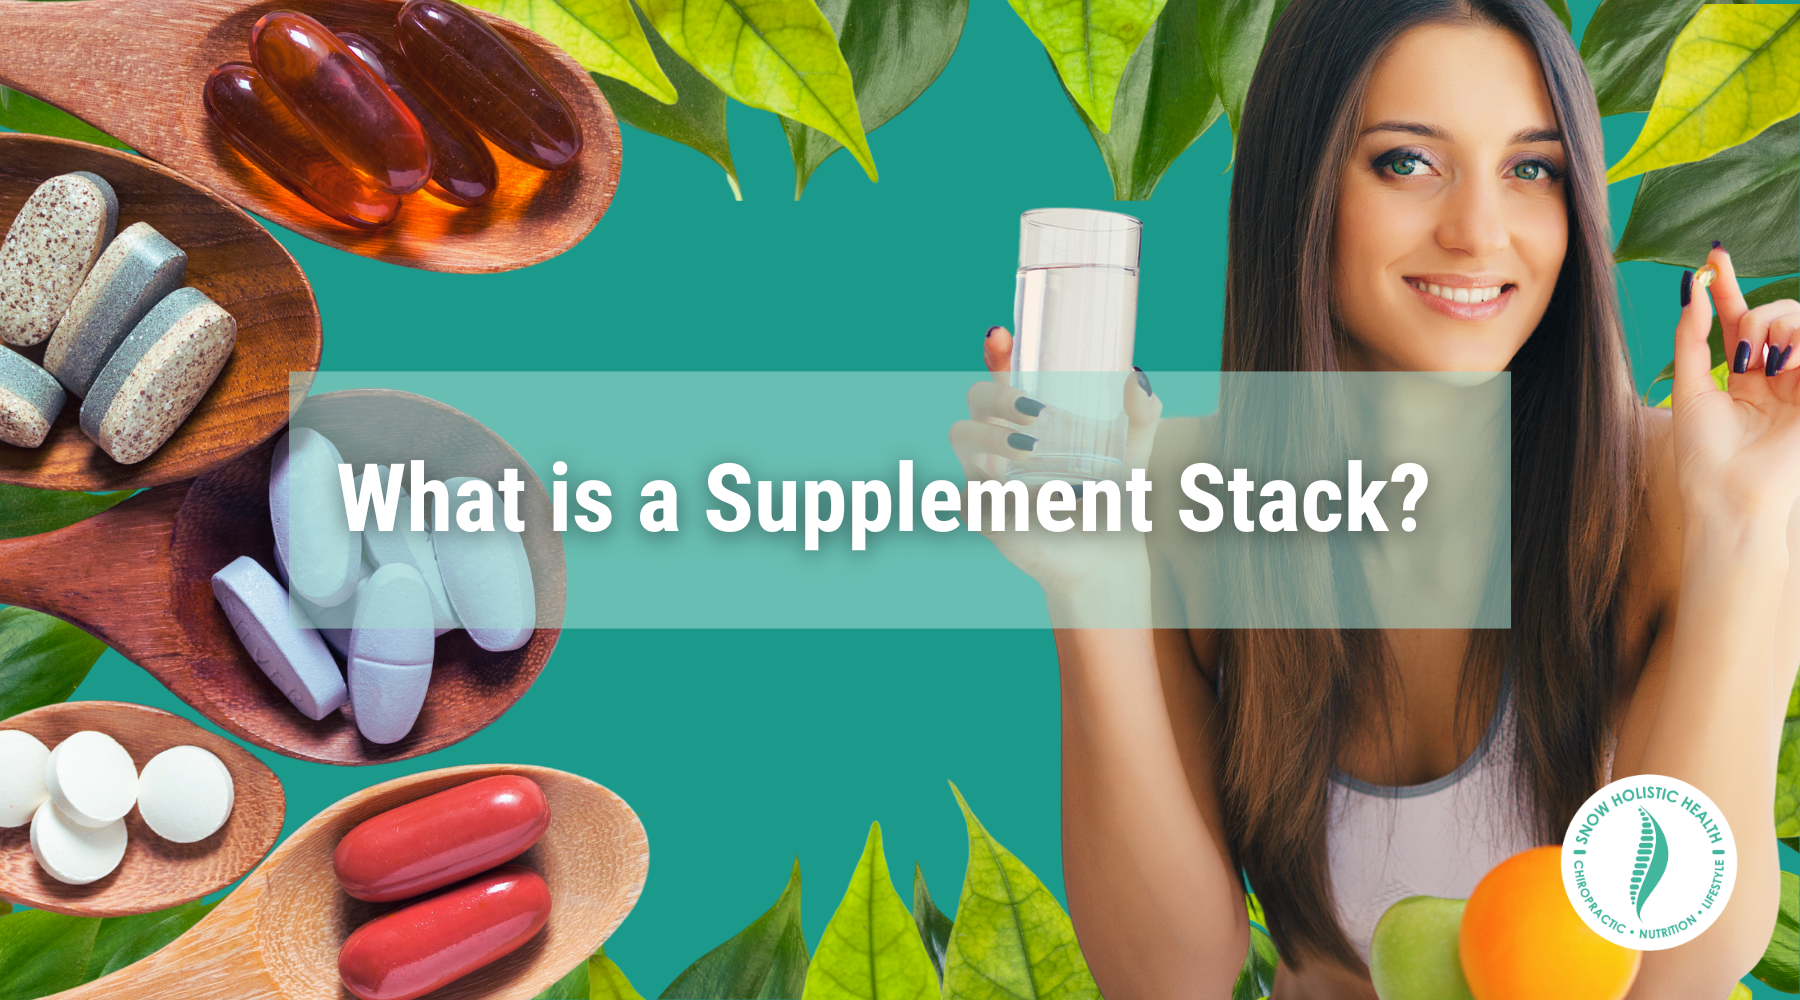 What is a Supplement Stack?